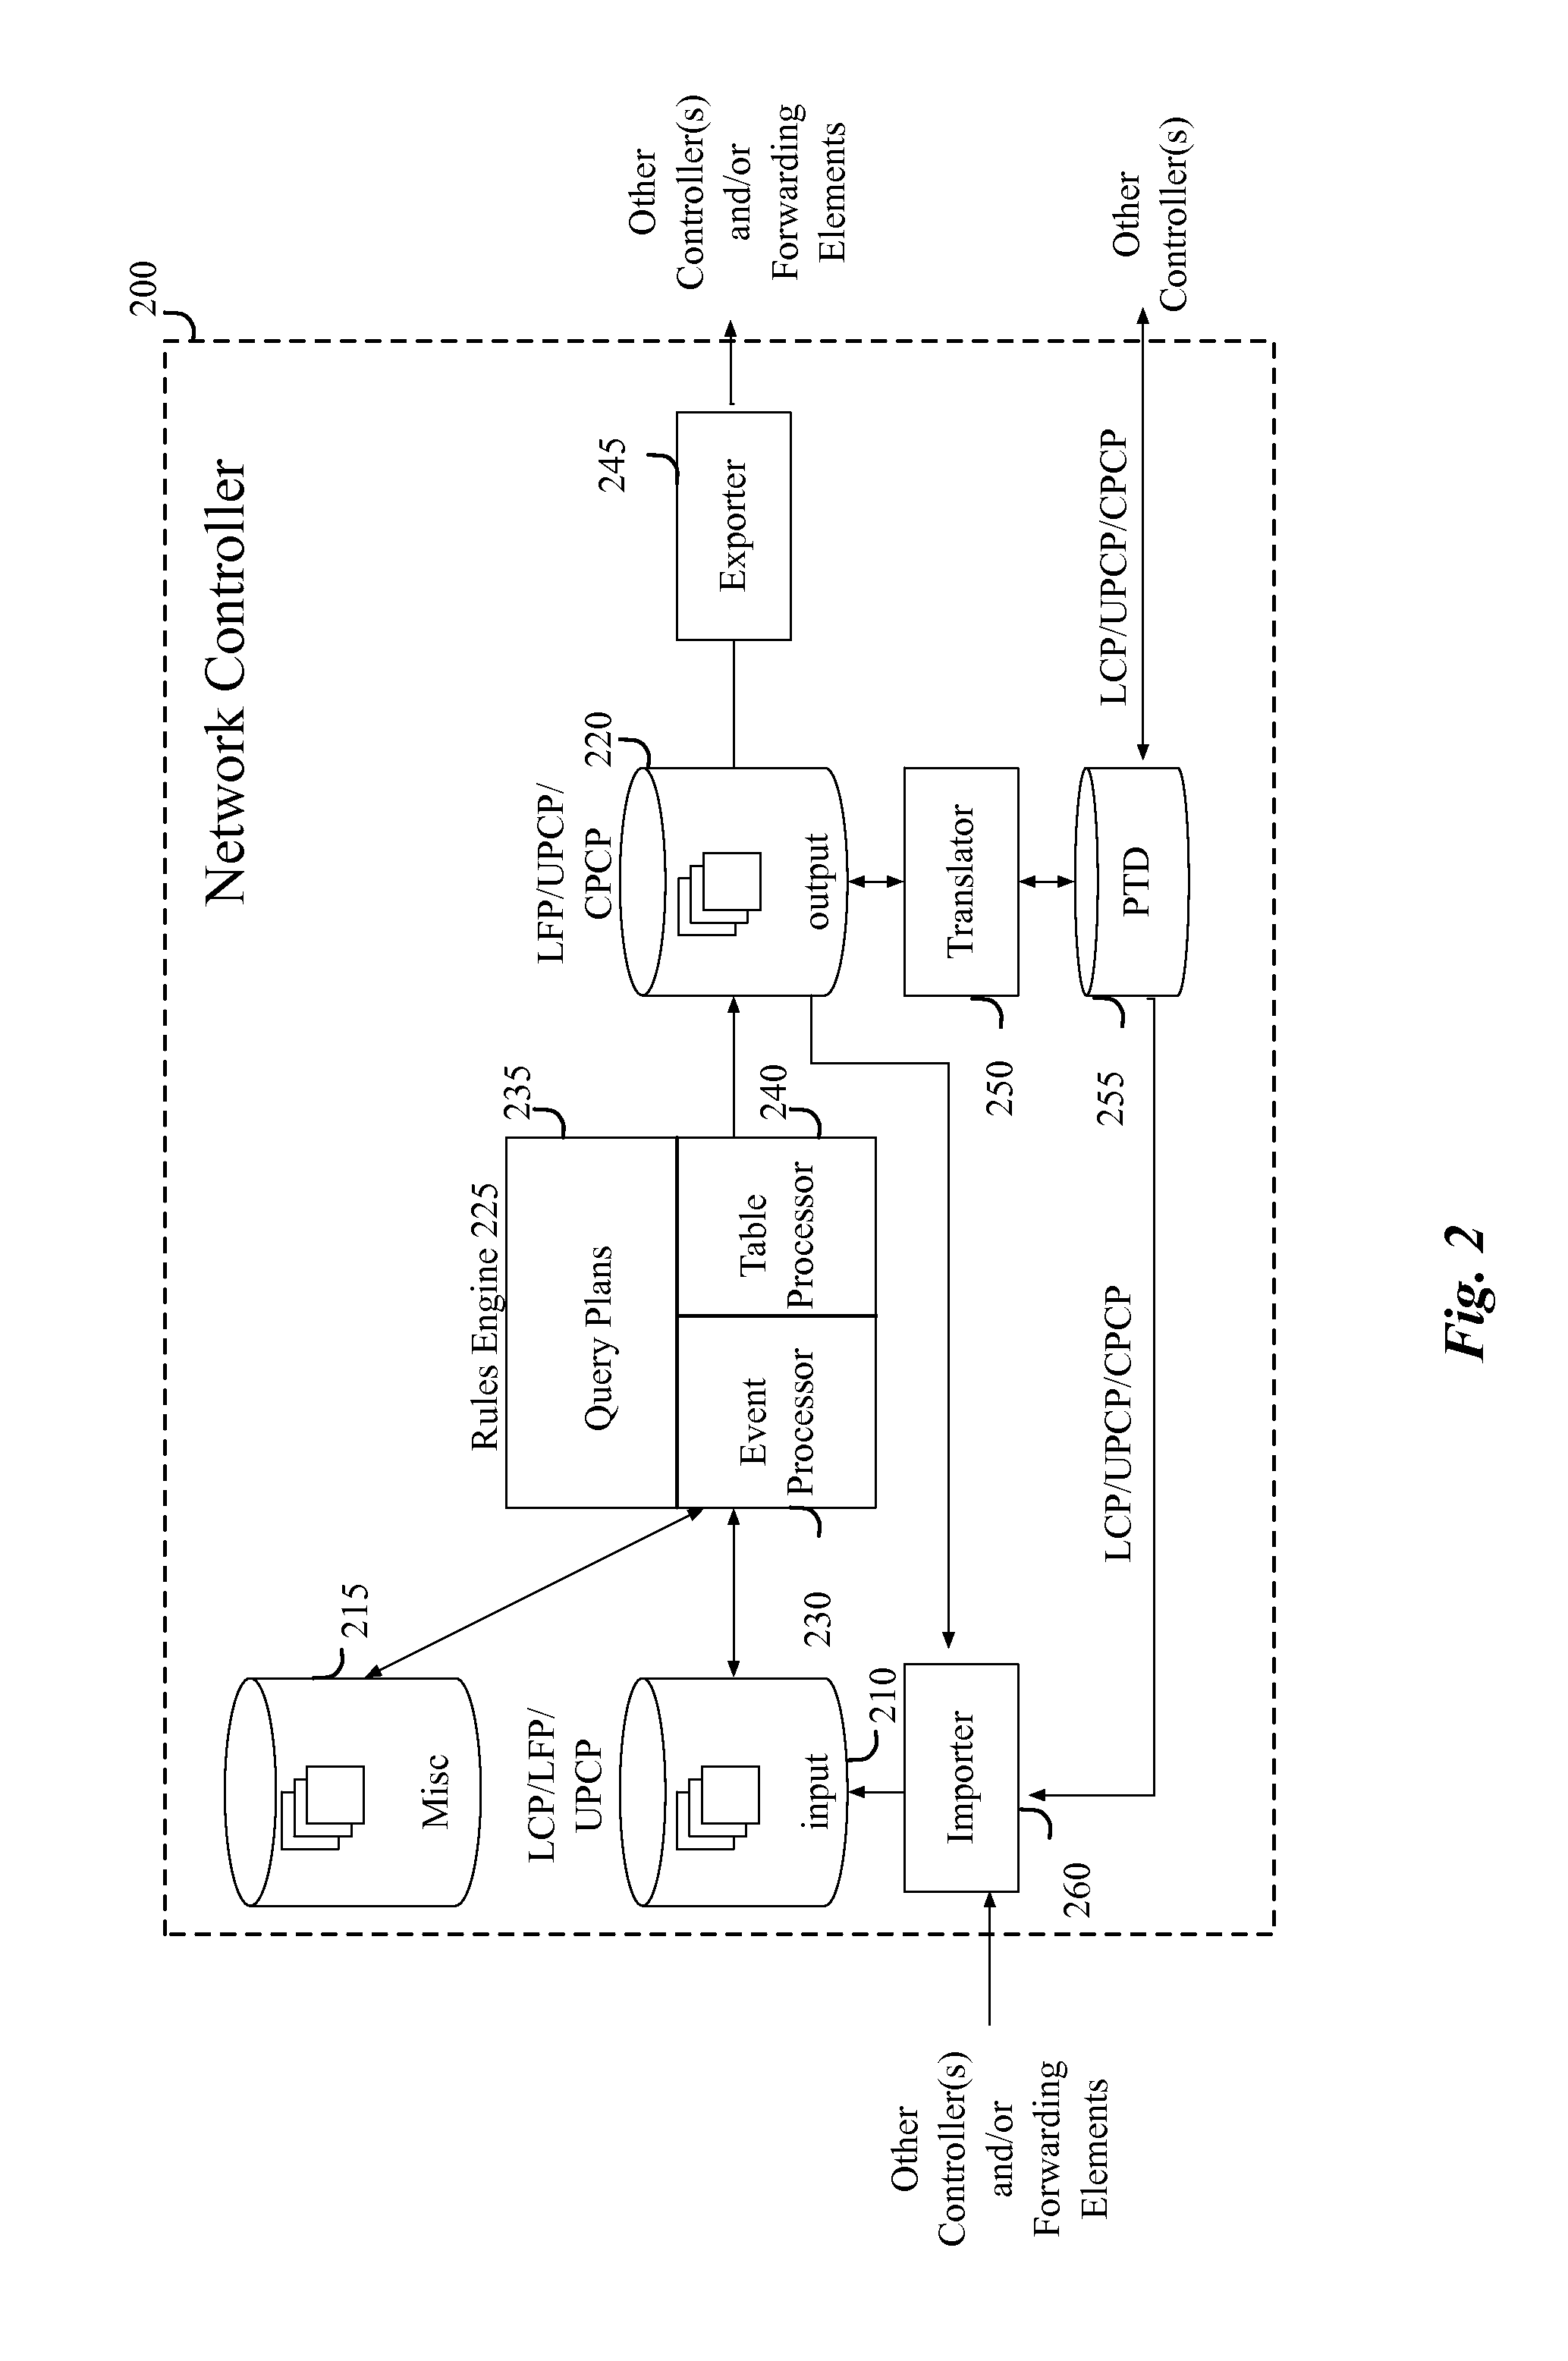 Buffered subscriber tables for maintaining a consistent network state